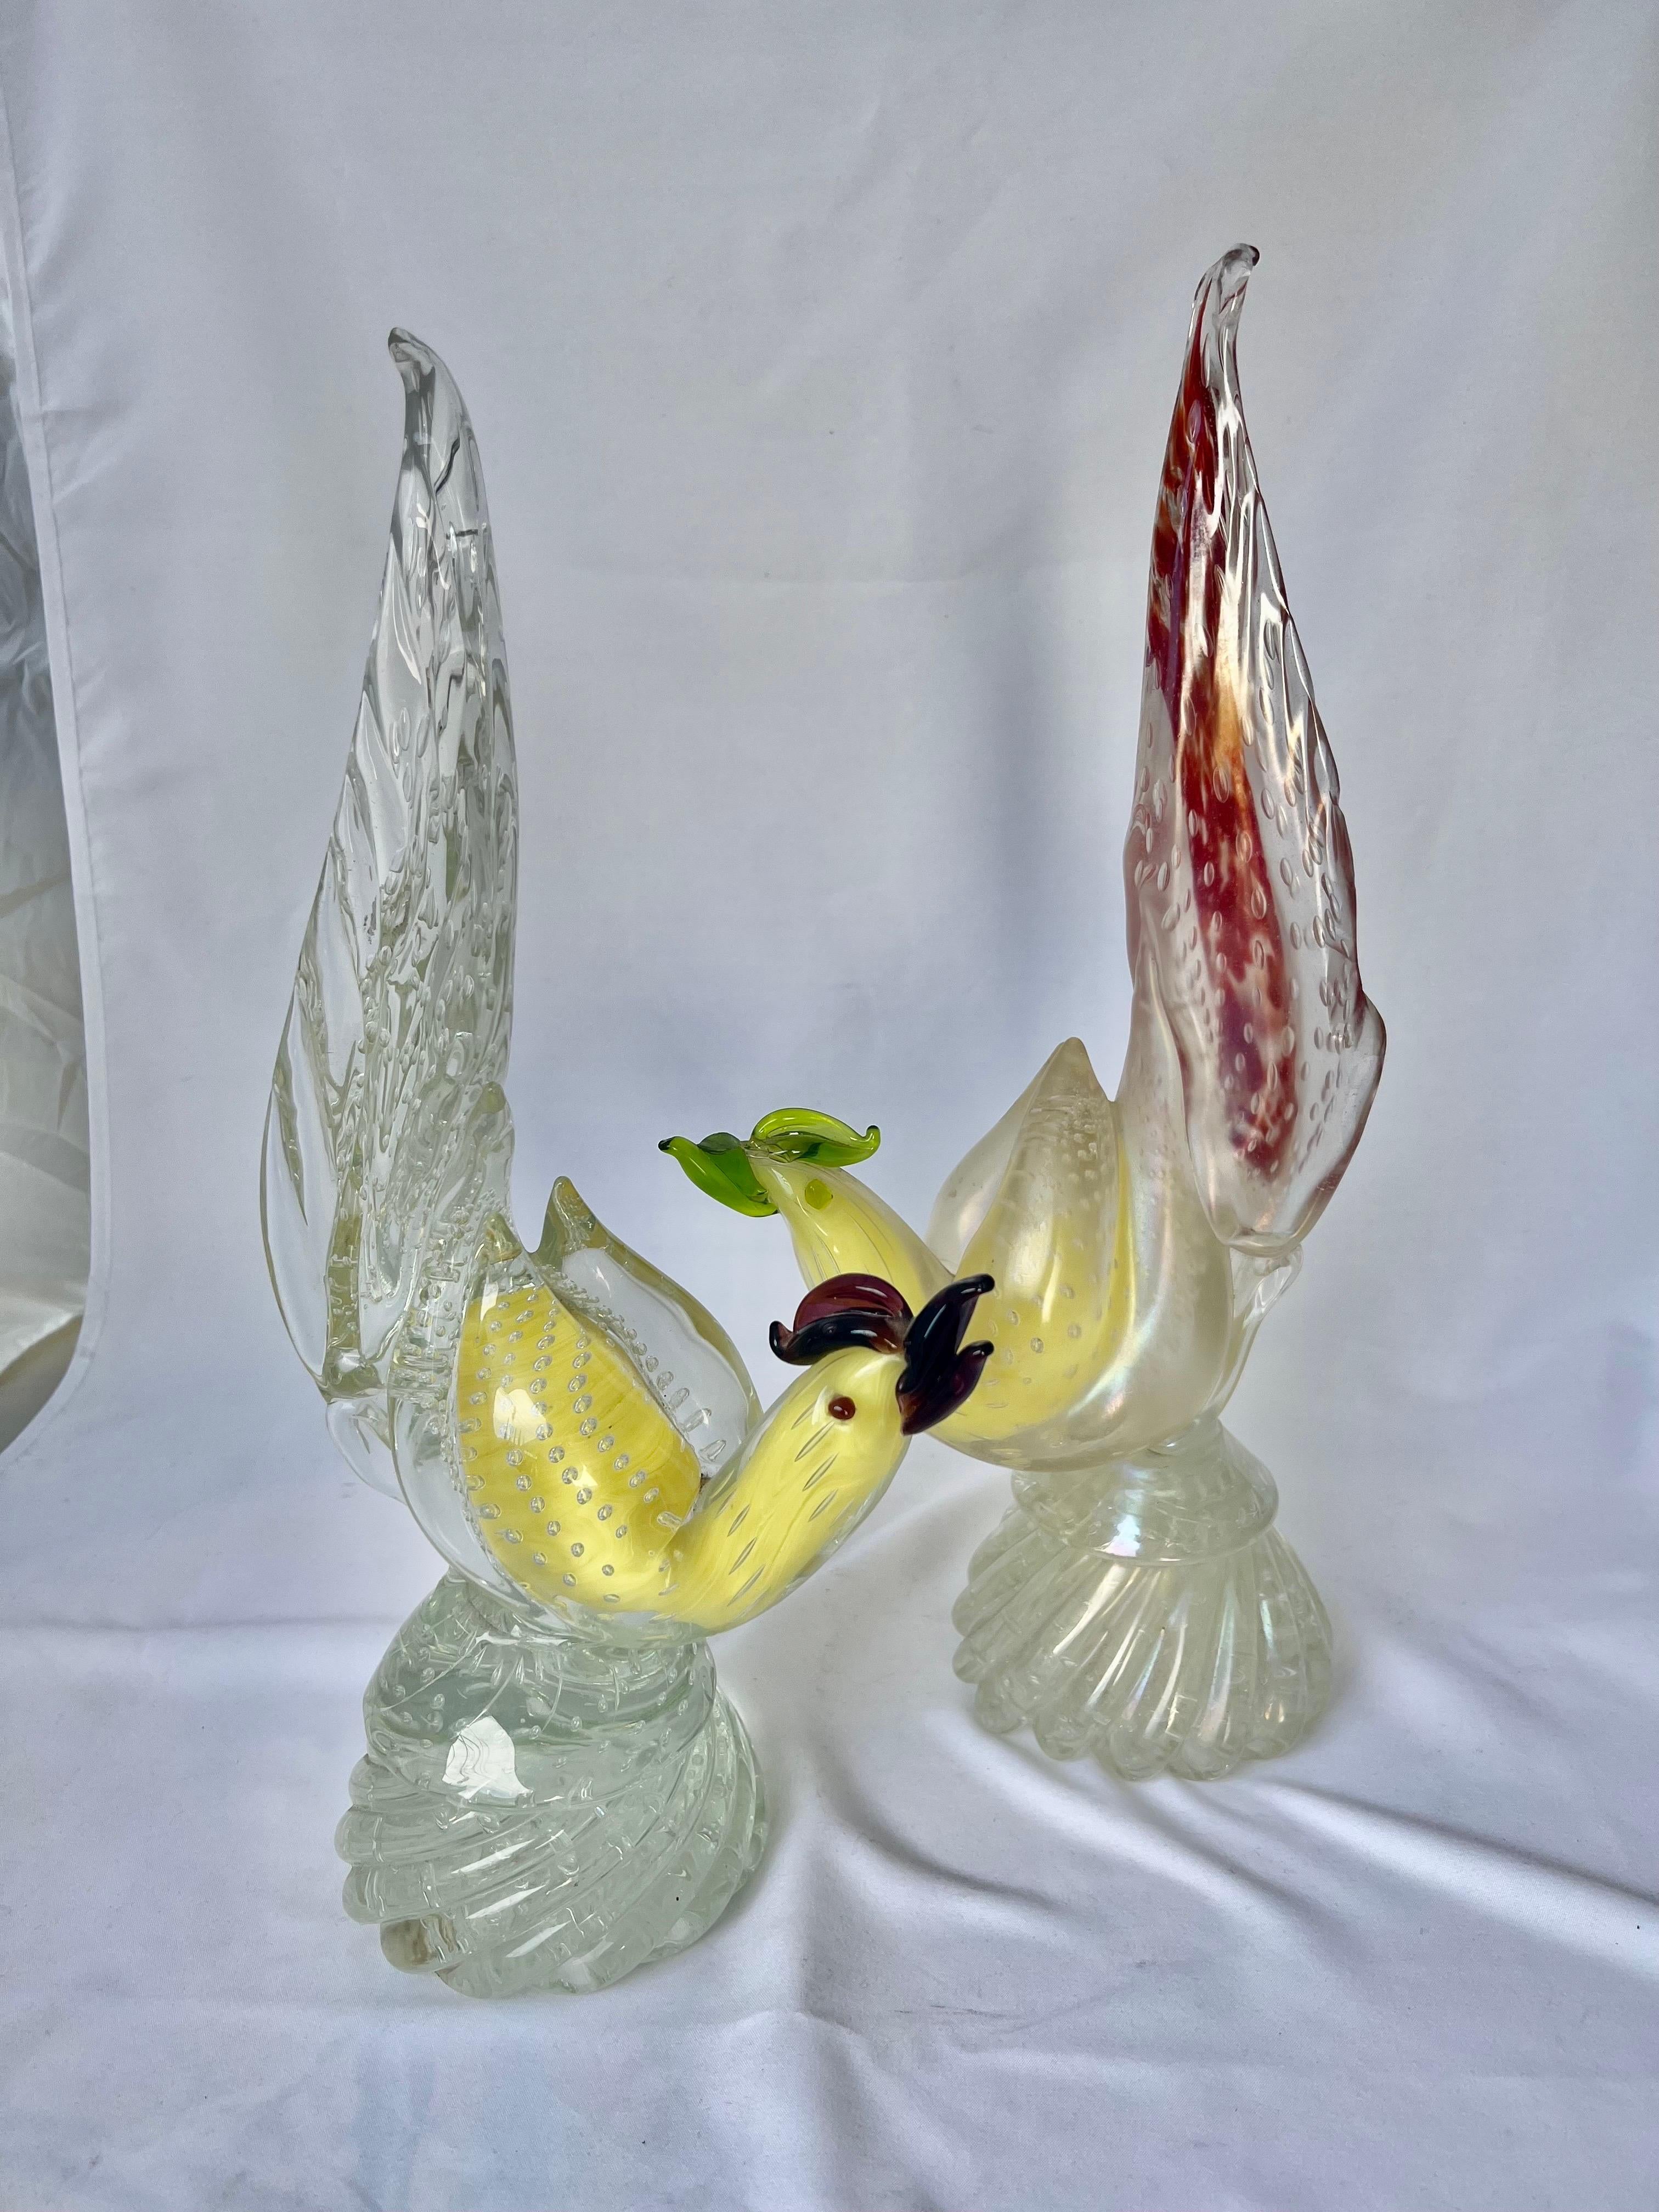 Pair of Italian Murano glass hand crafted pair of detailed birds with long feathery tails. They were all hand blown in Venice, Italy.